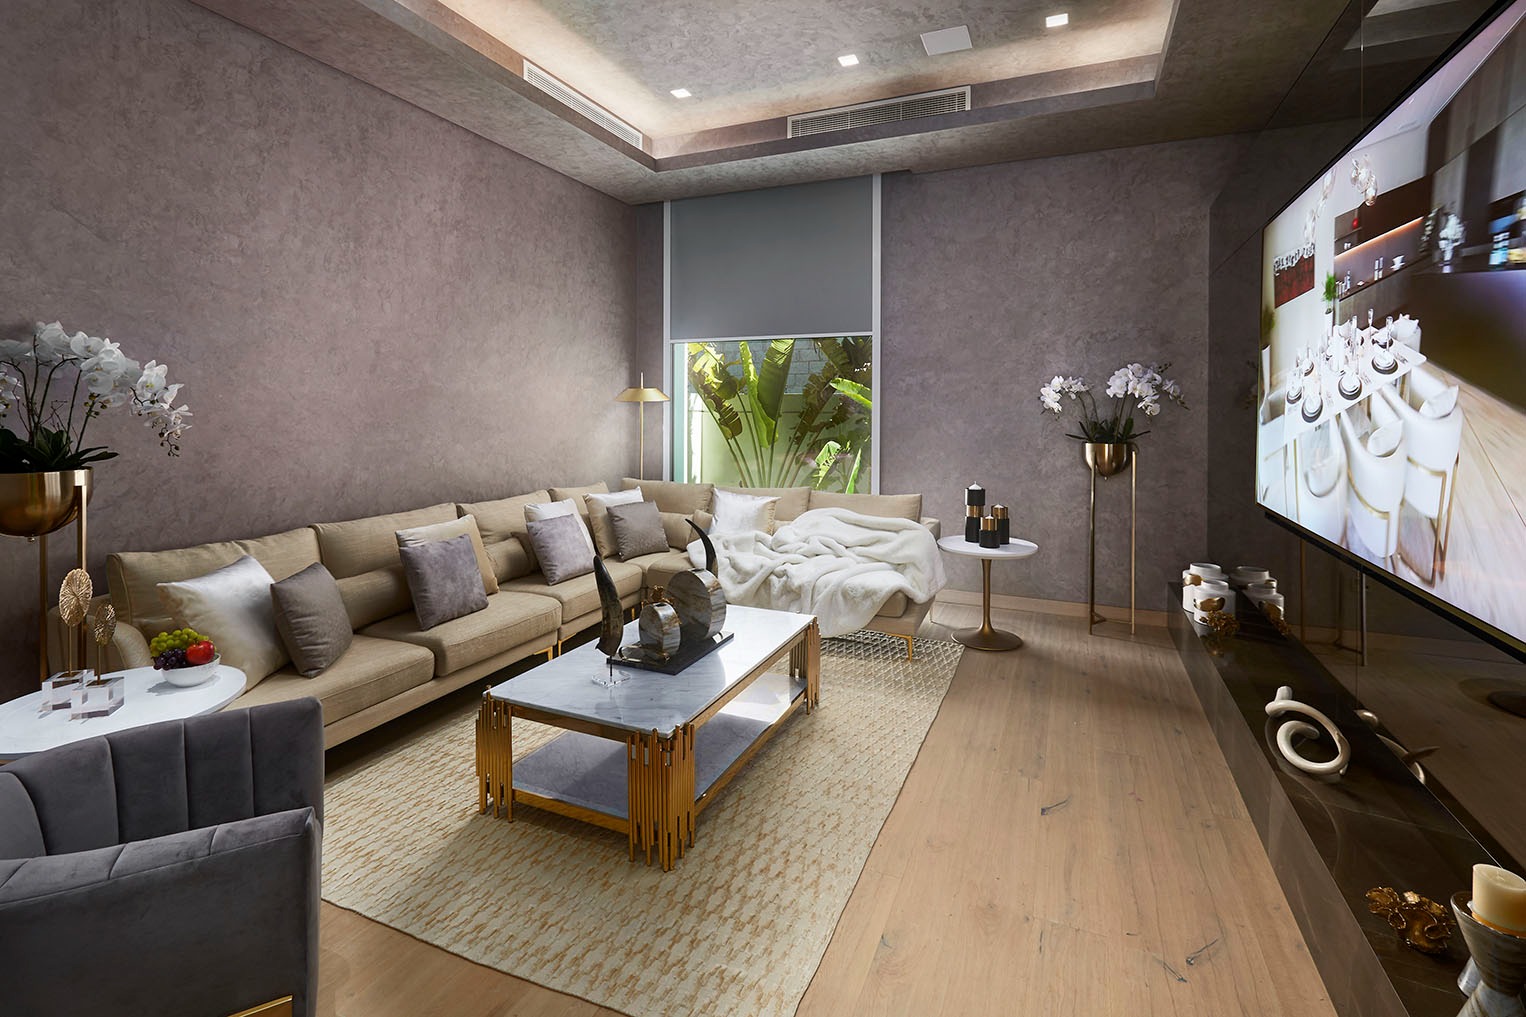 What Elements Are Involved in Interior Designing?